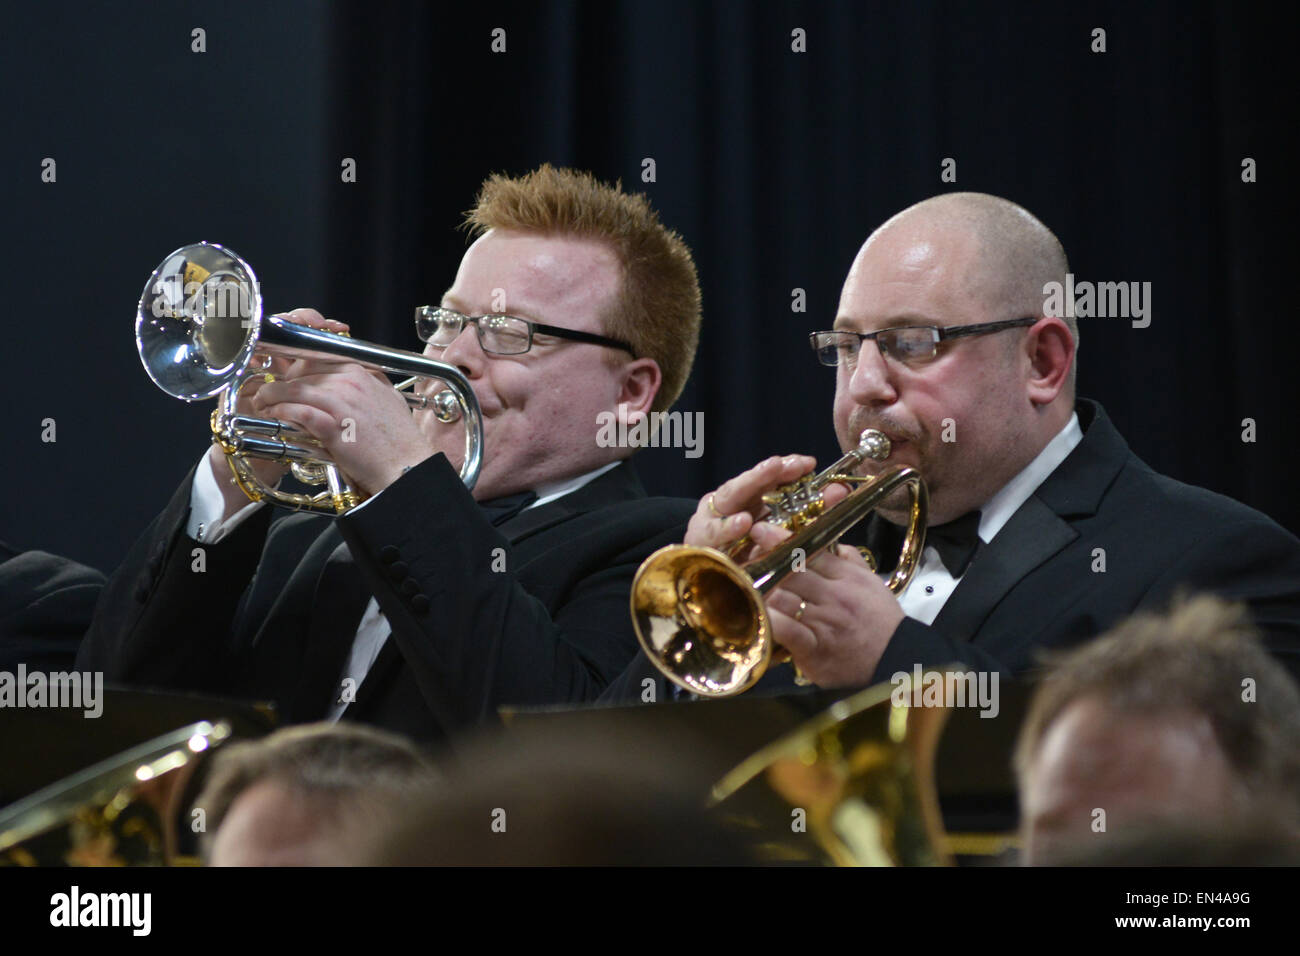 Grimethorpe Colliery Band in concert at Barnsley, UK. 6th November 2014. Picture: Scott Bairstow/Alamy Stock Photo